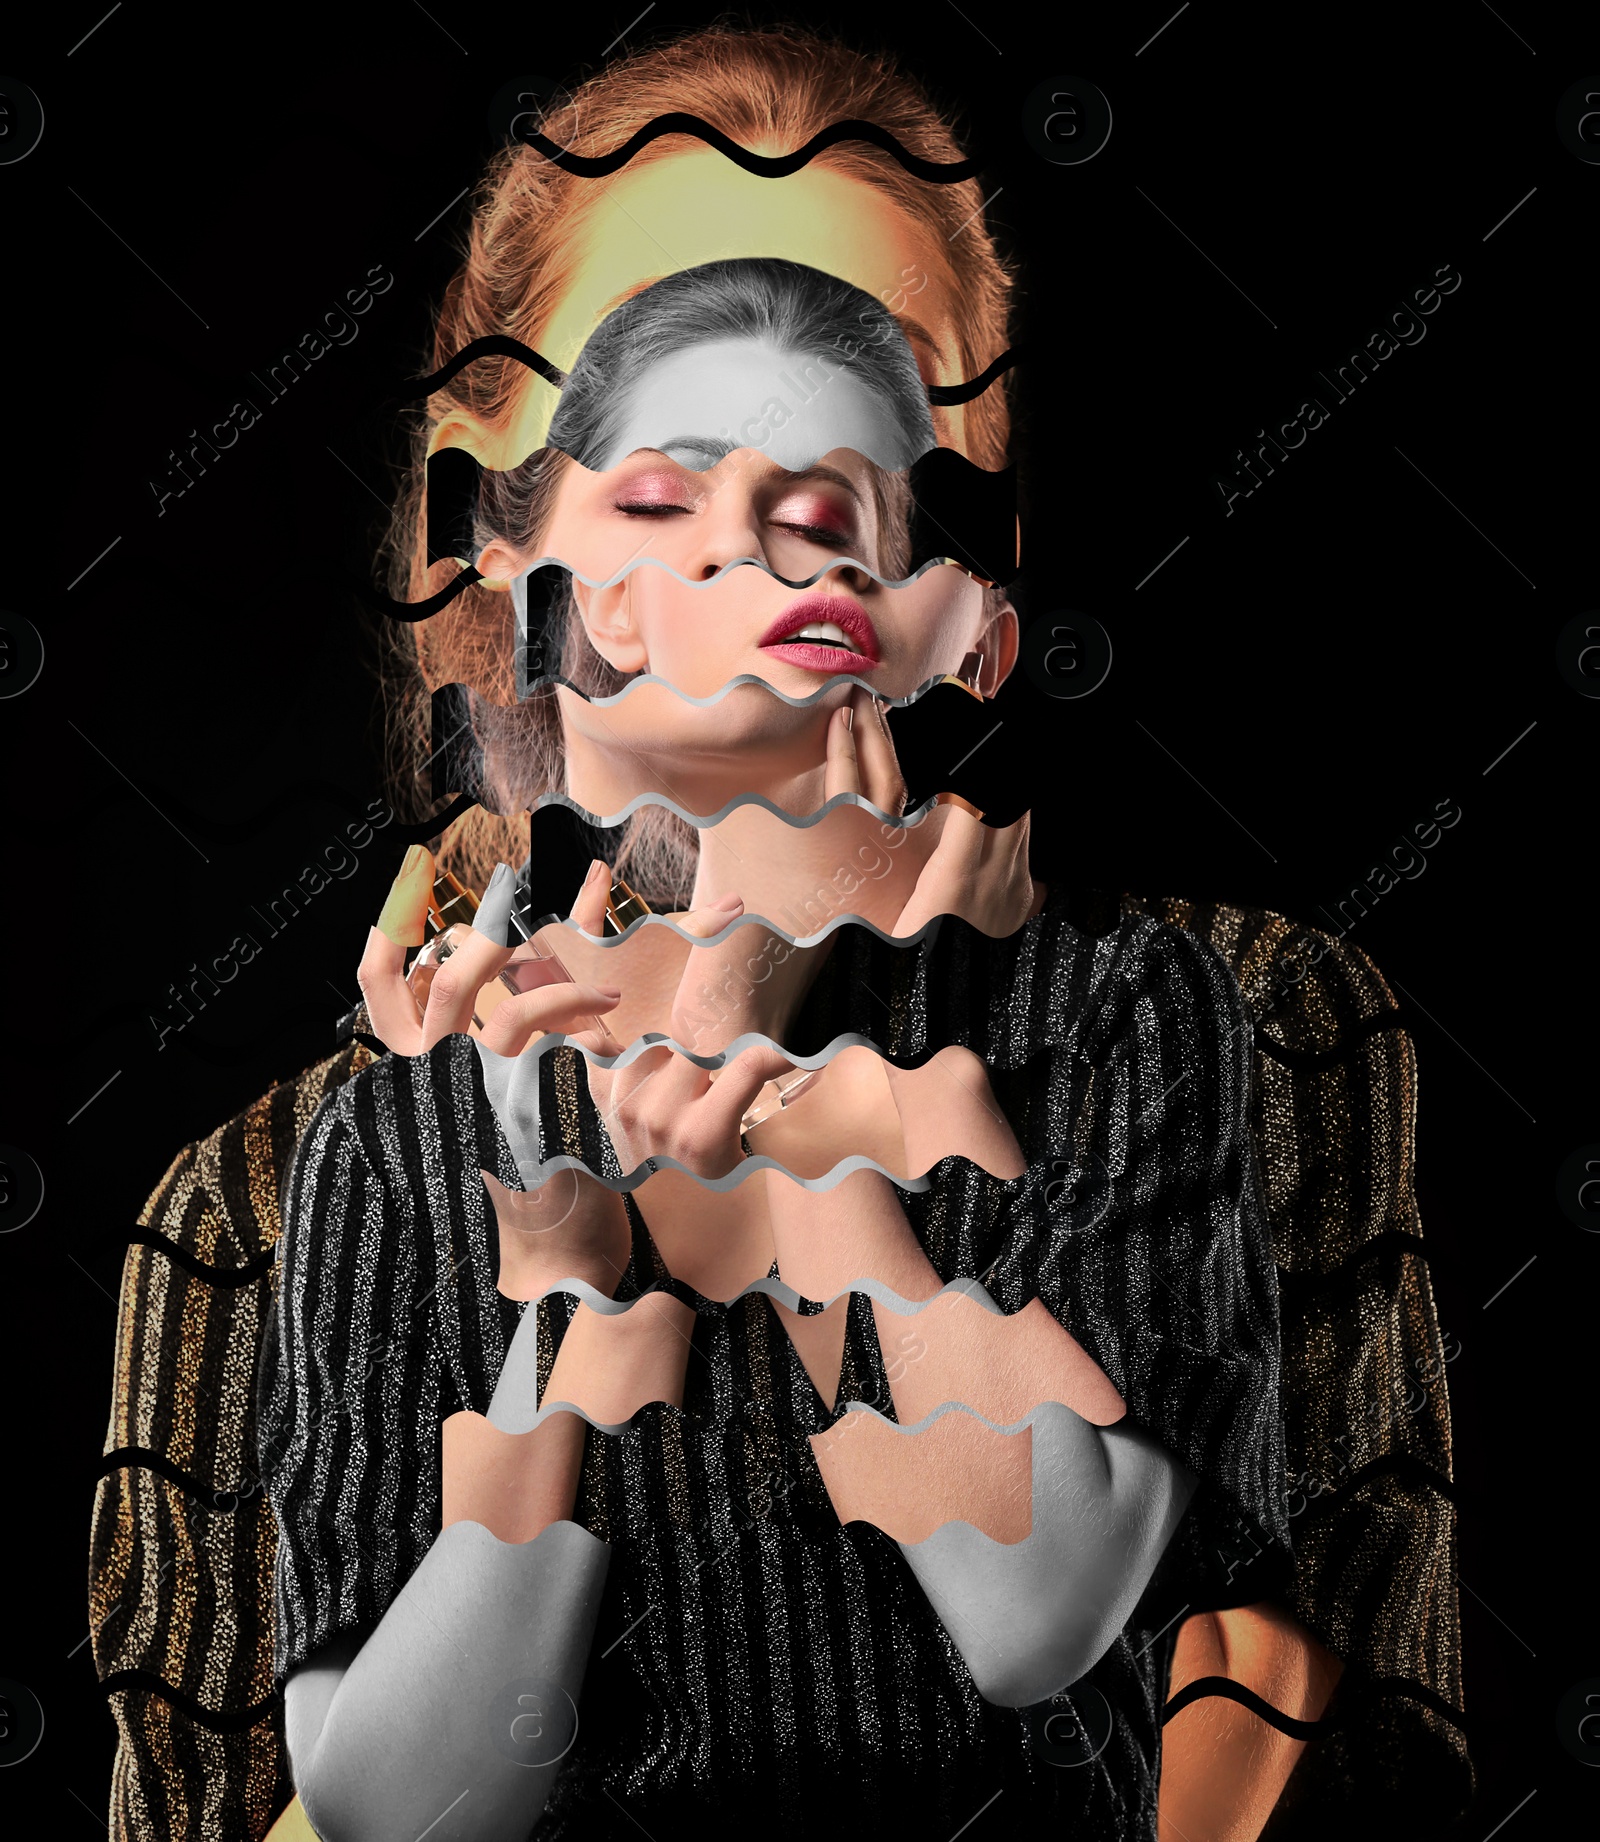 Image of Stylish creative artwork with portrait of beautiful woman made with face photo pieces on black background